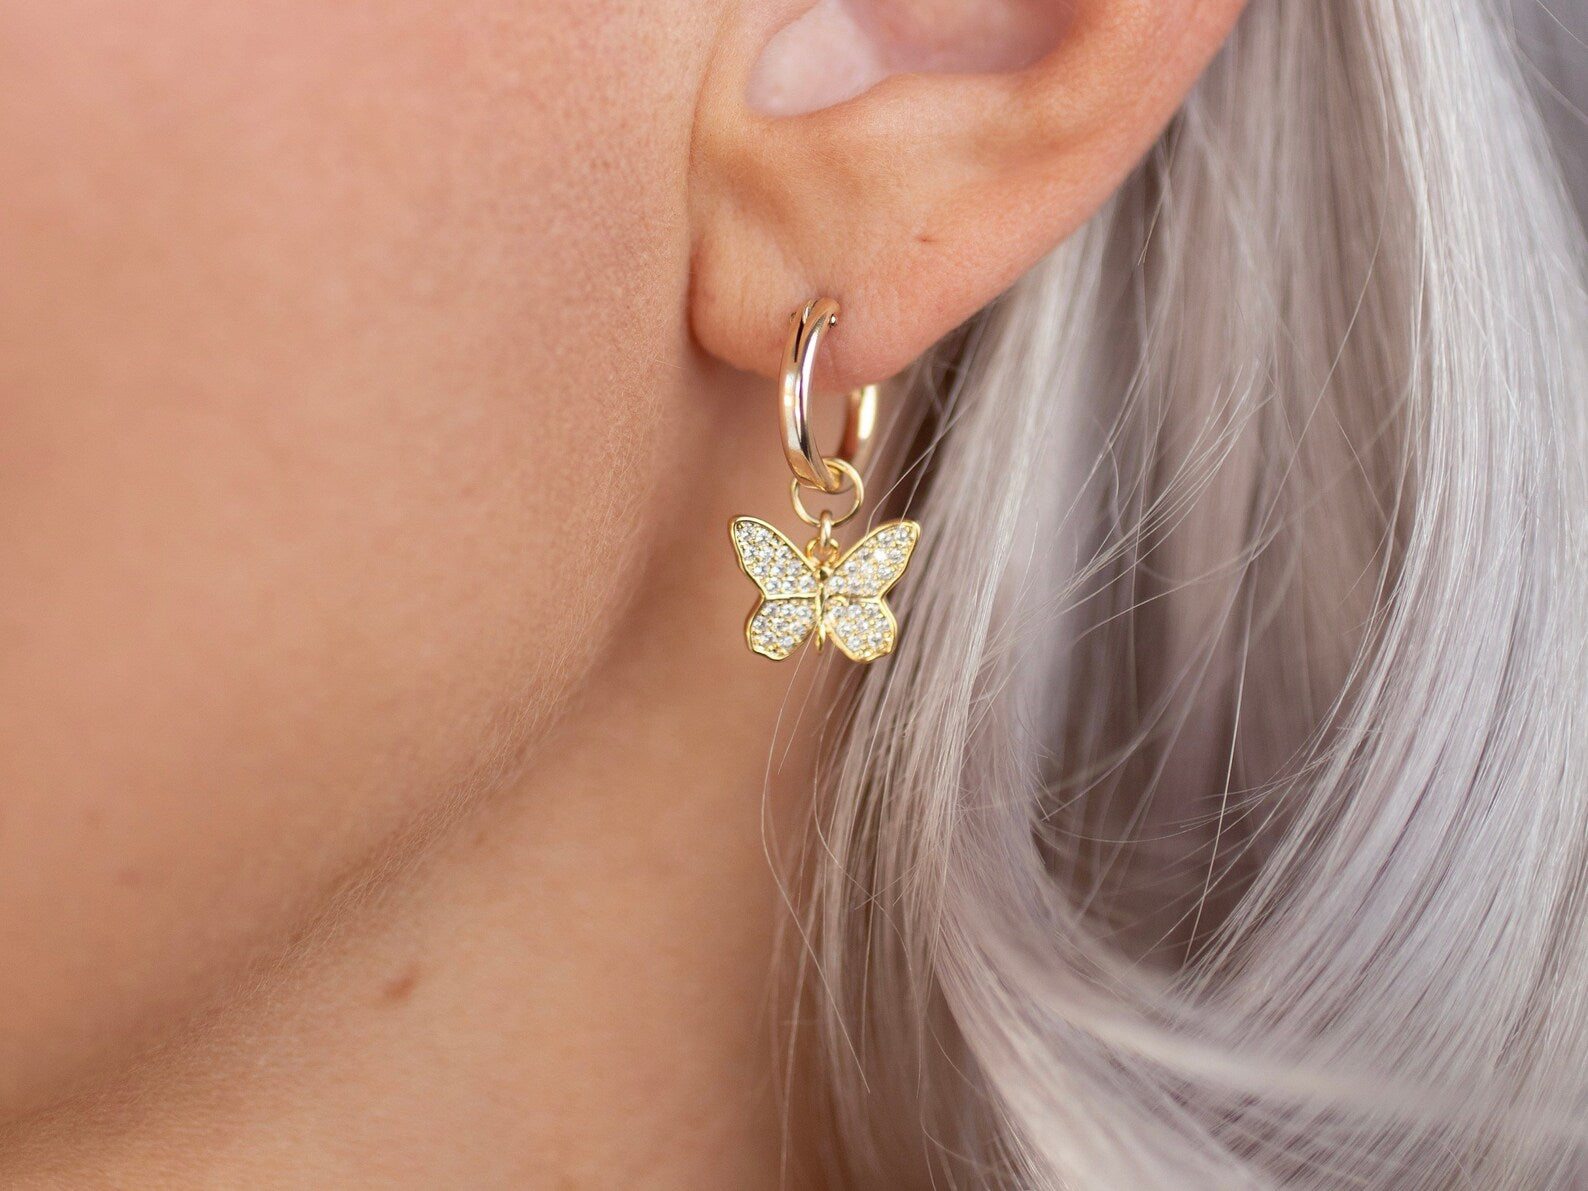 Update more than 198 gold butterfly earrings hoops